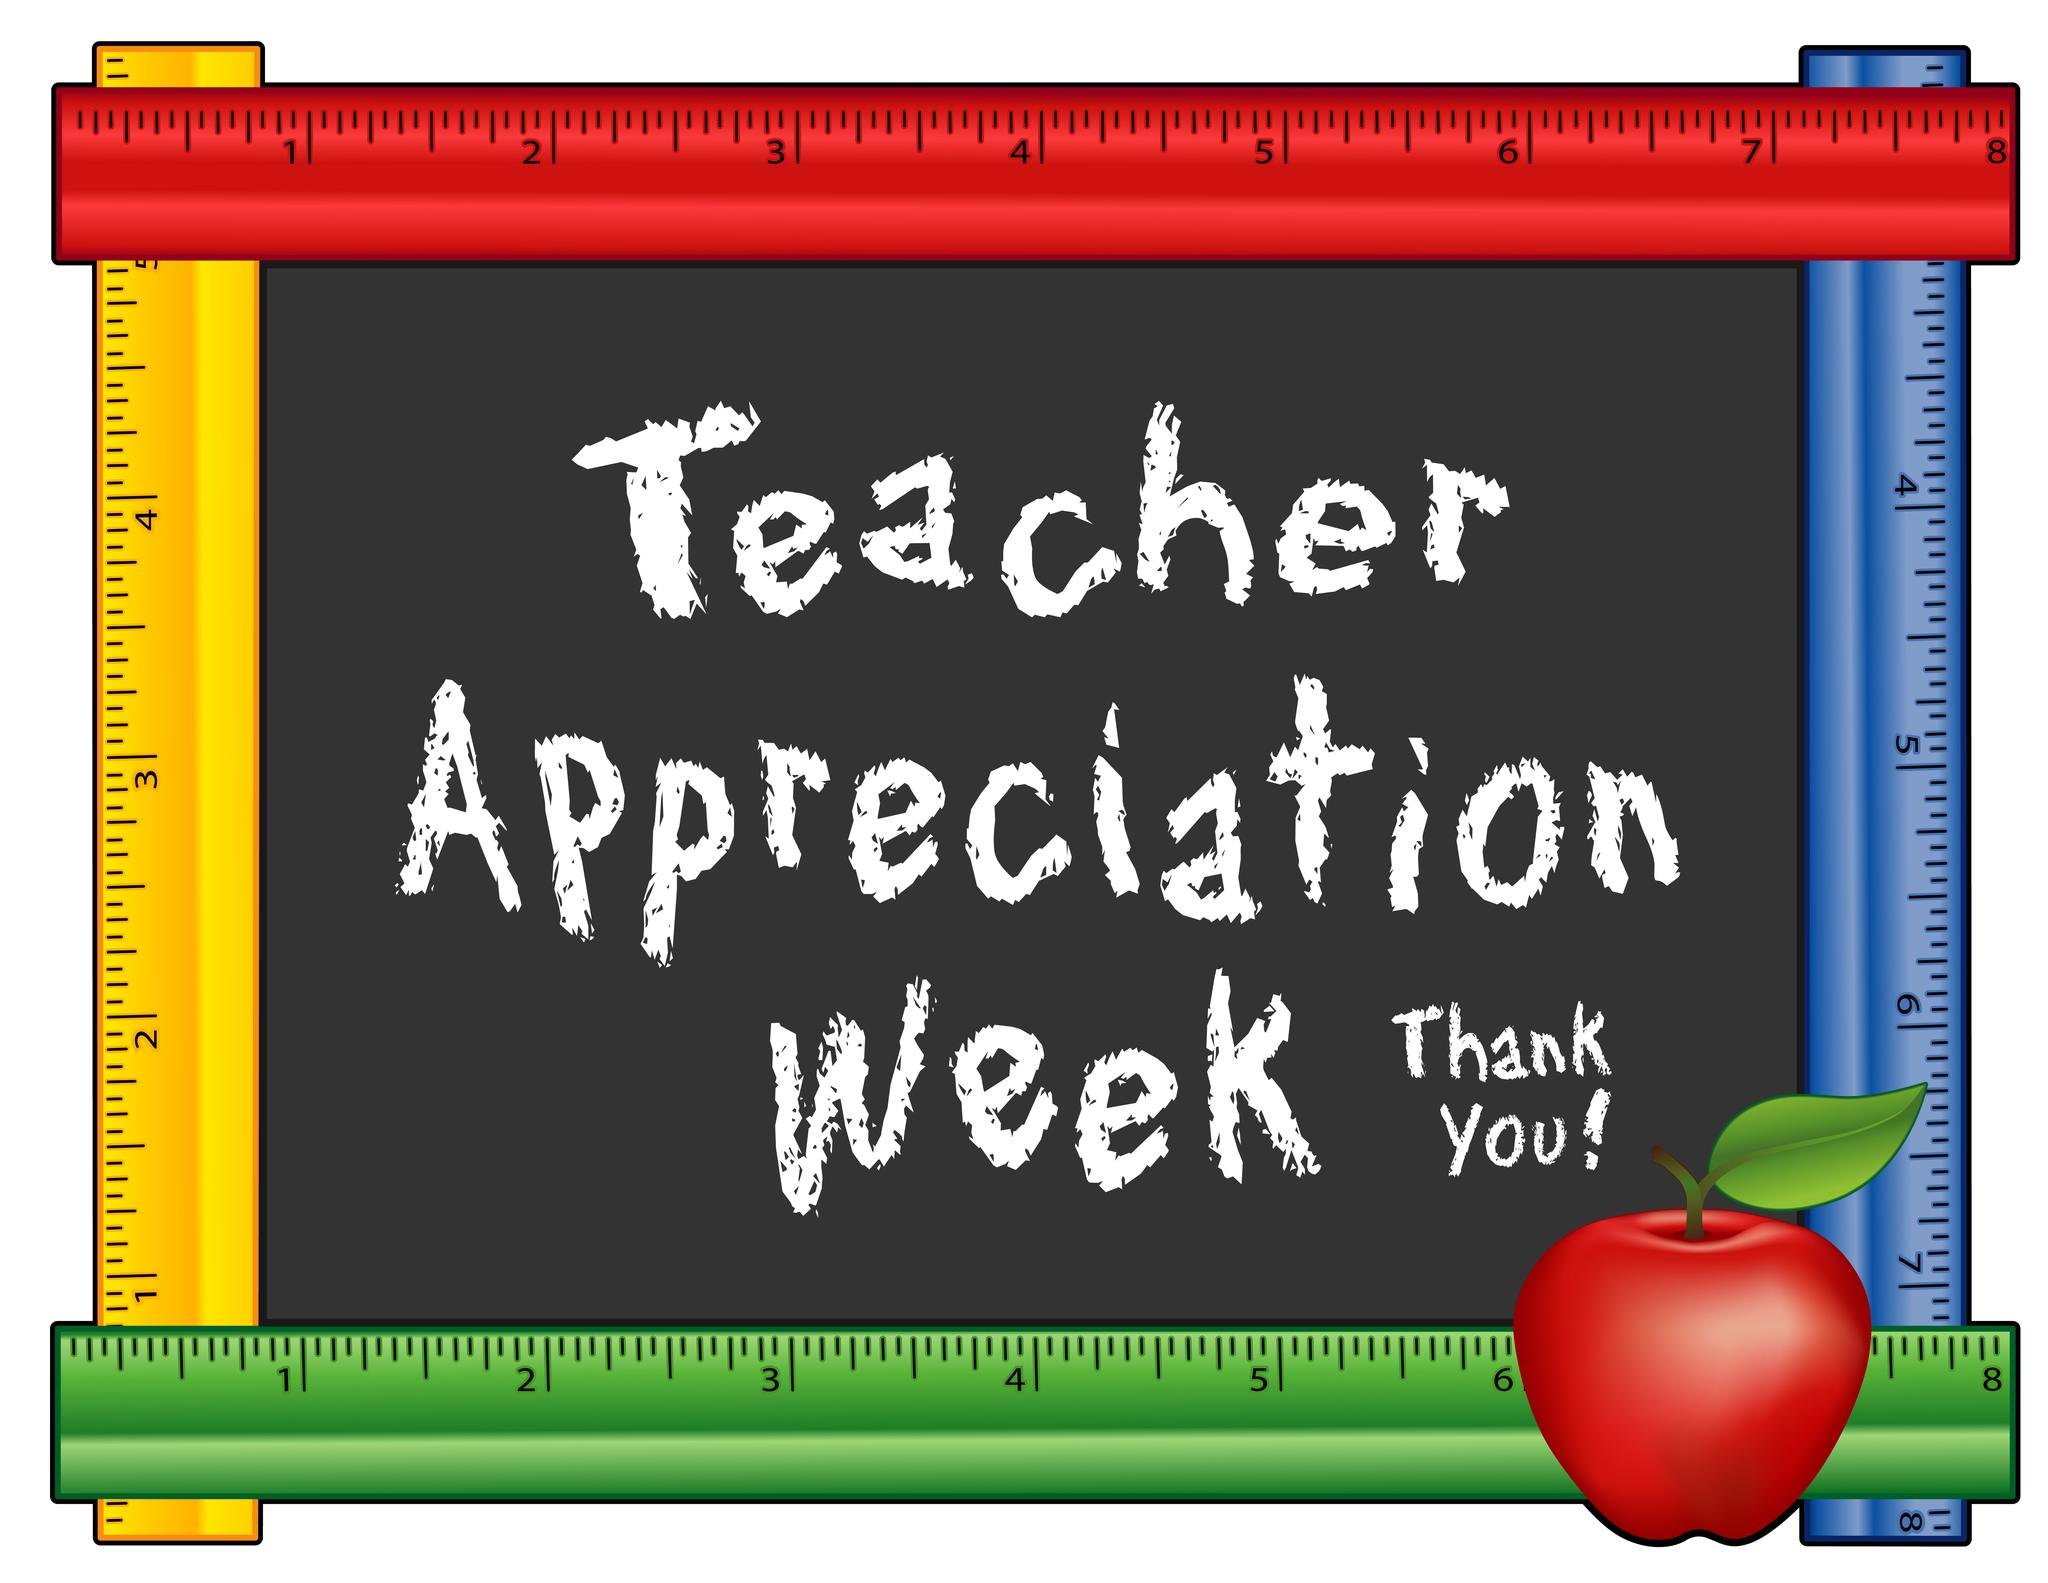 🌟💧 Happy Teachers Appreciation Week! 💧🌟

To all the amazing educators out there, including those in our own community, we want to express our heartfelt gratitude for your dedication, passion, and hard work.

Thank you for everything you do! 💙 

